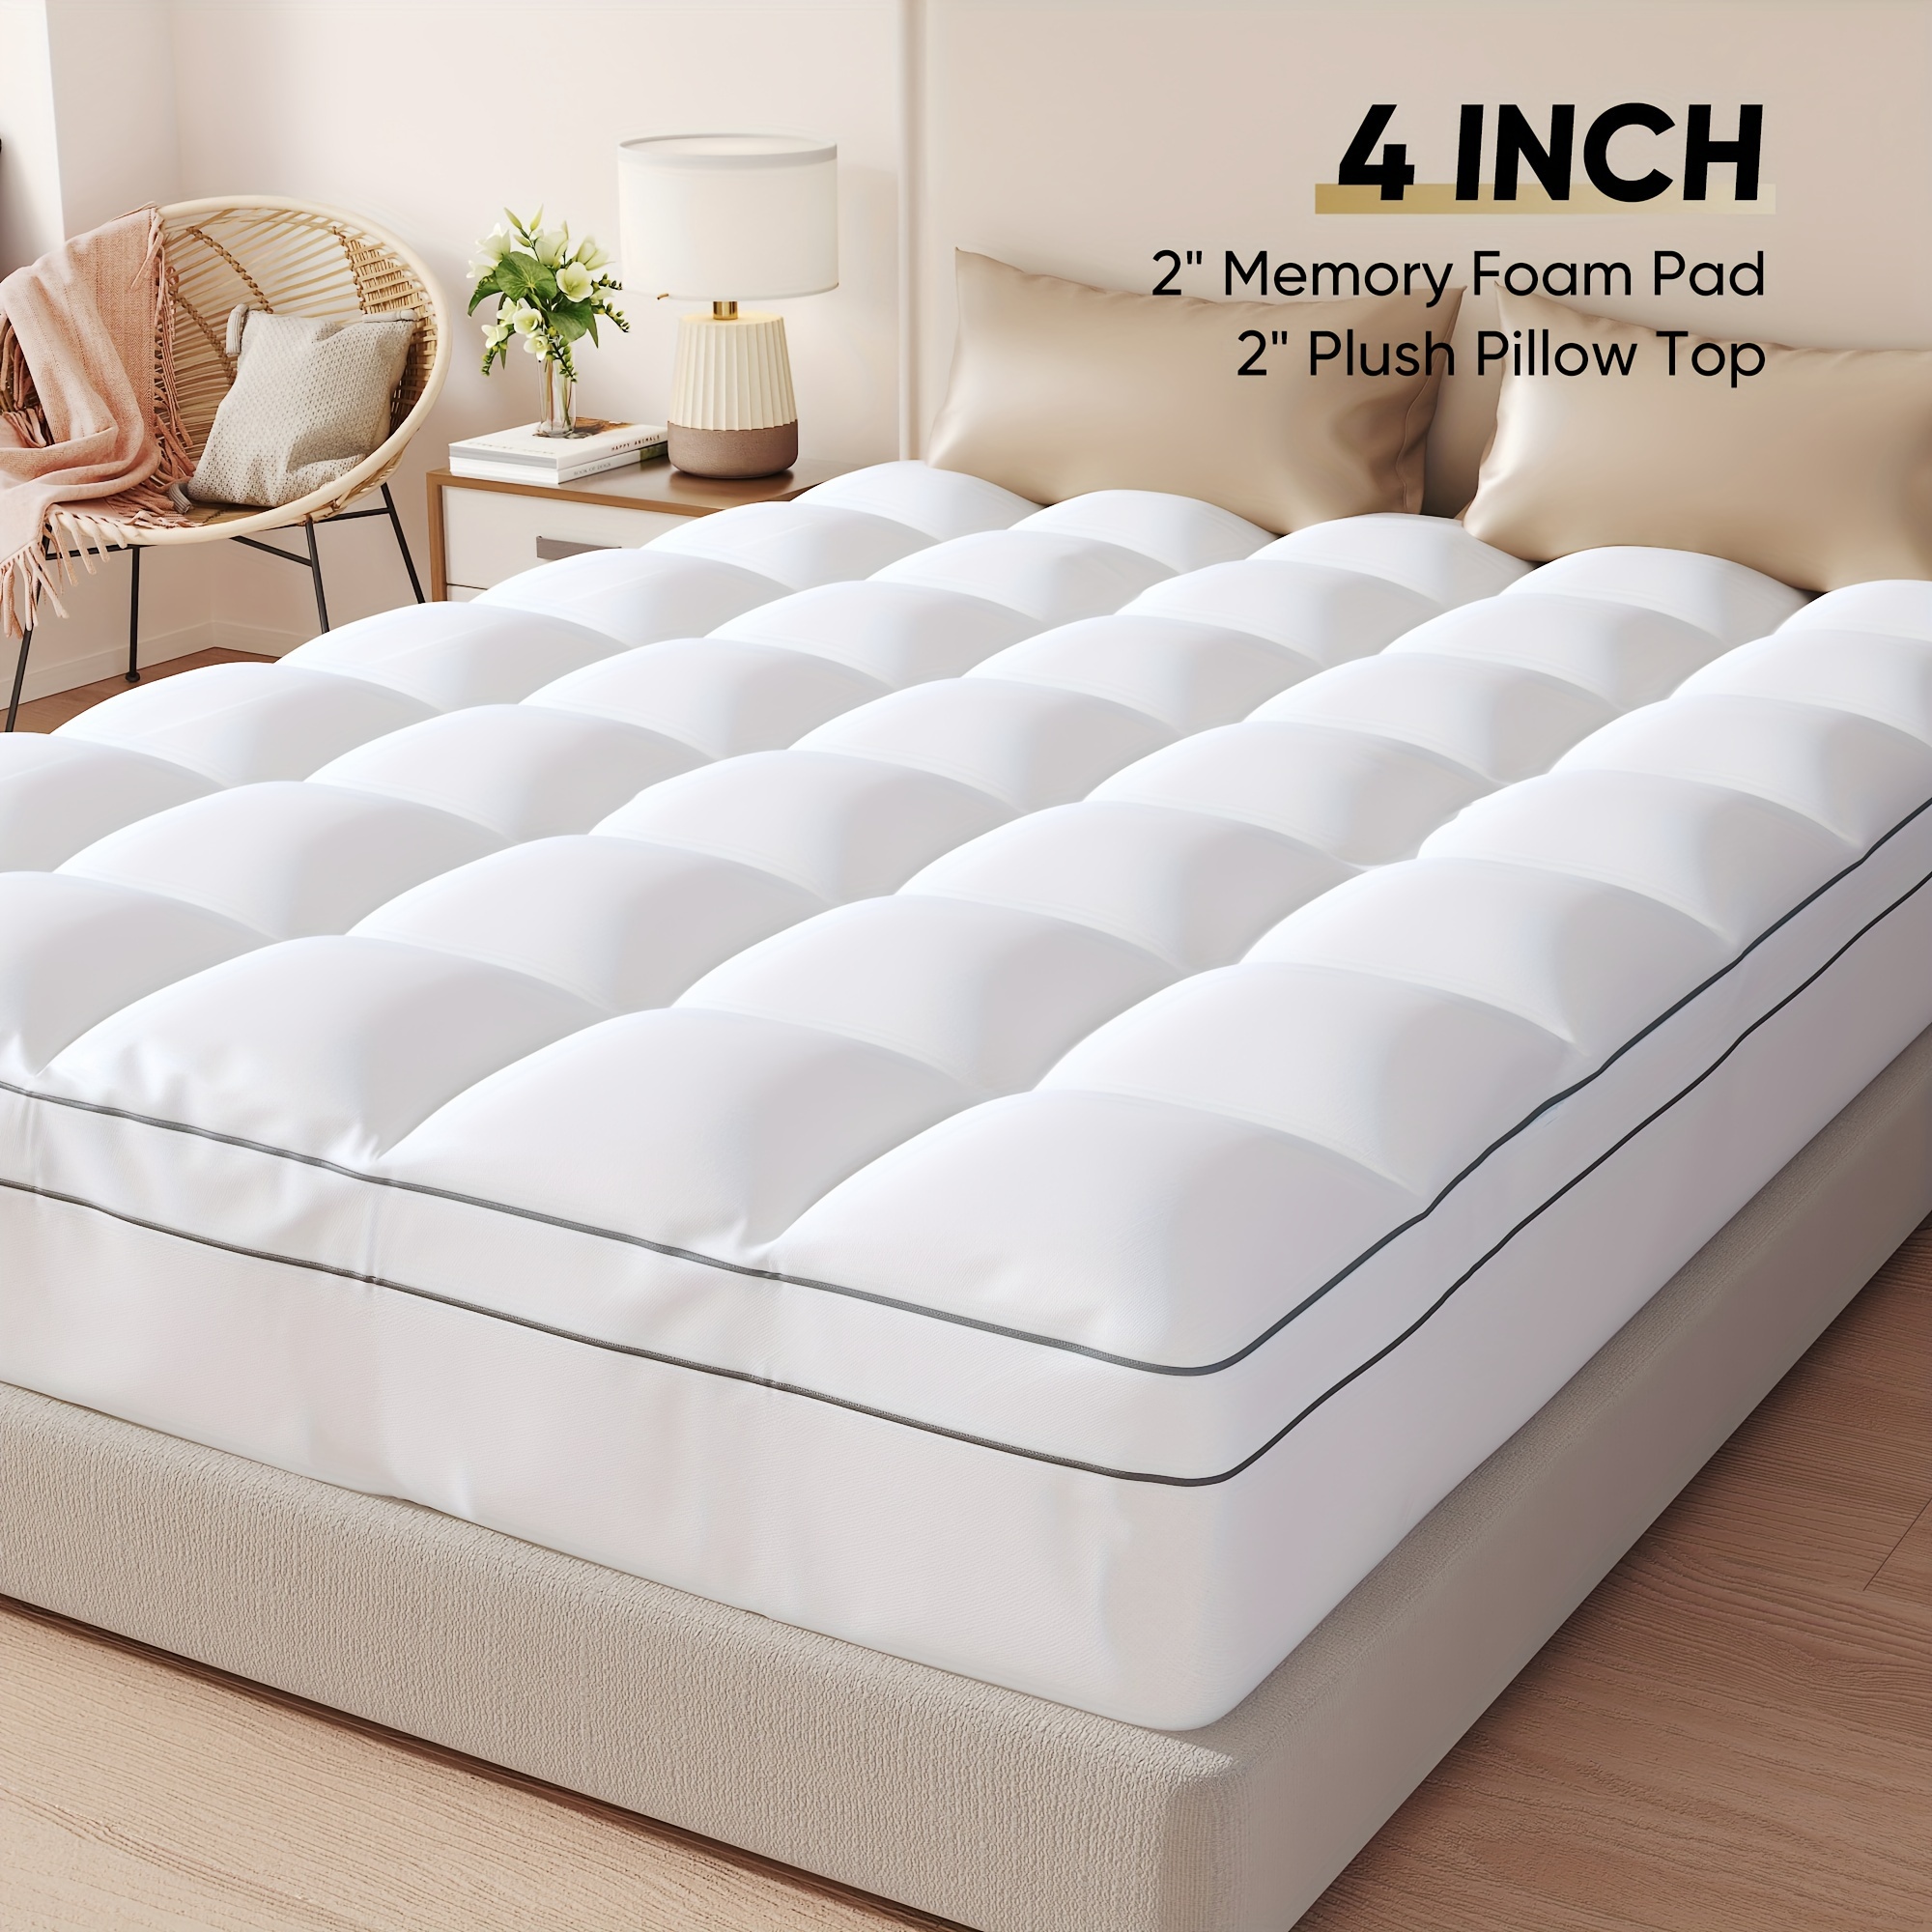 

Cooling Memory Foam Mattress Topper Queen Size, Gel-infused Mattress Pad Cover For , Bed Topper With Removable & Washable Bamboo Cover